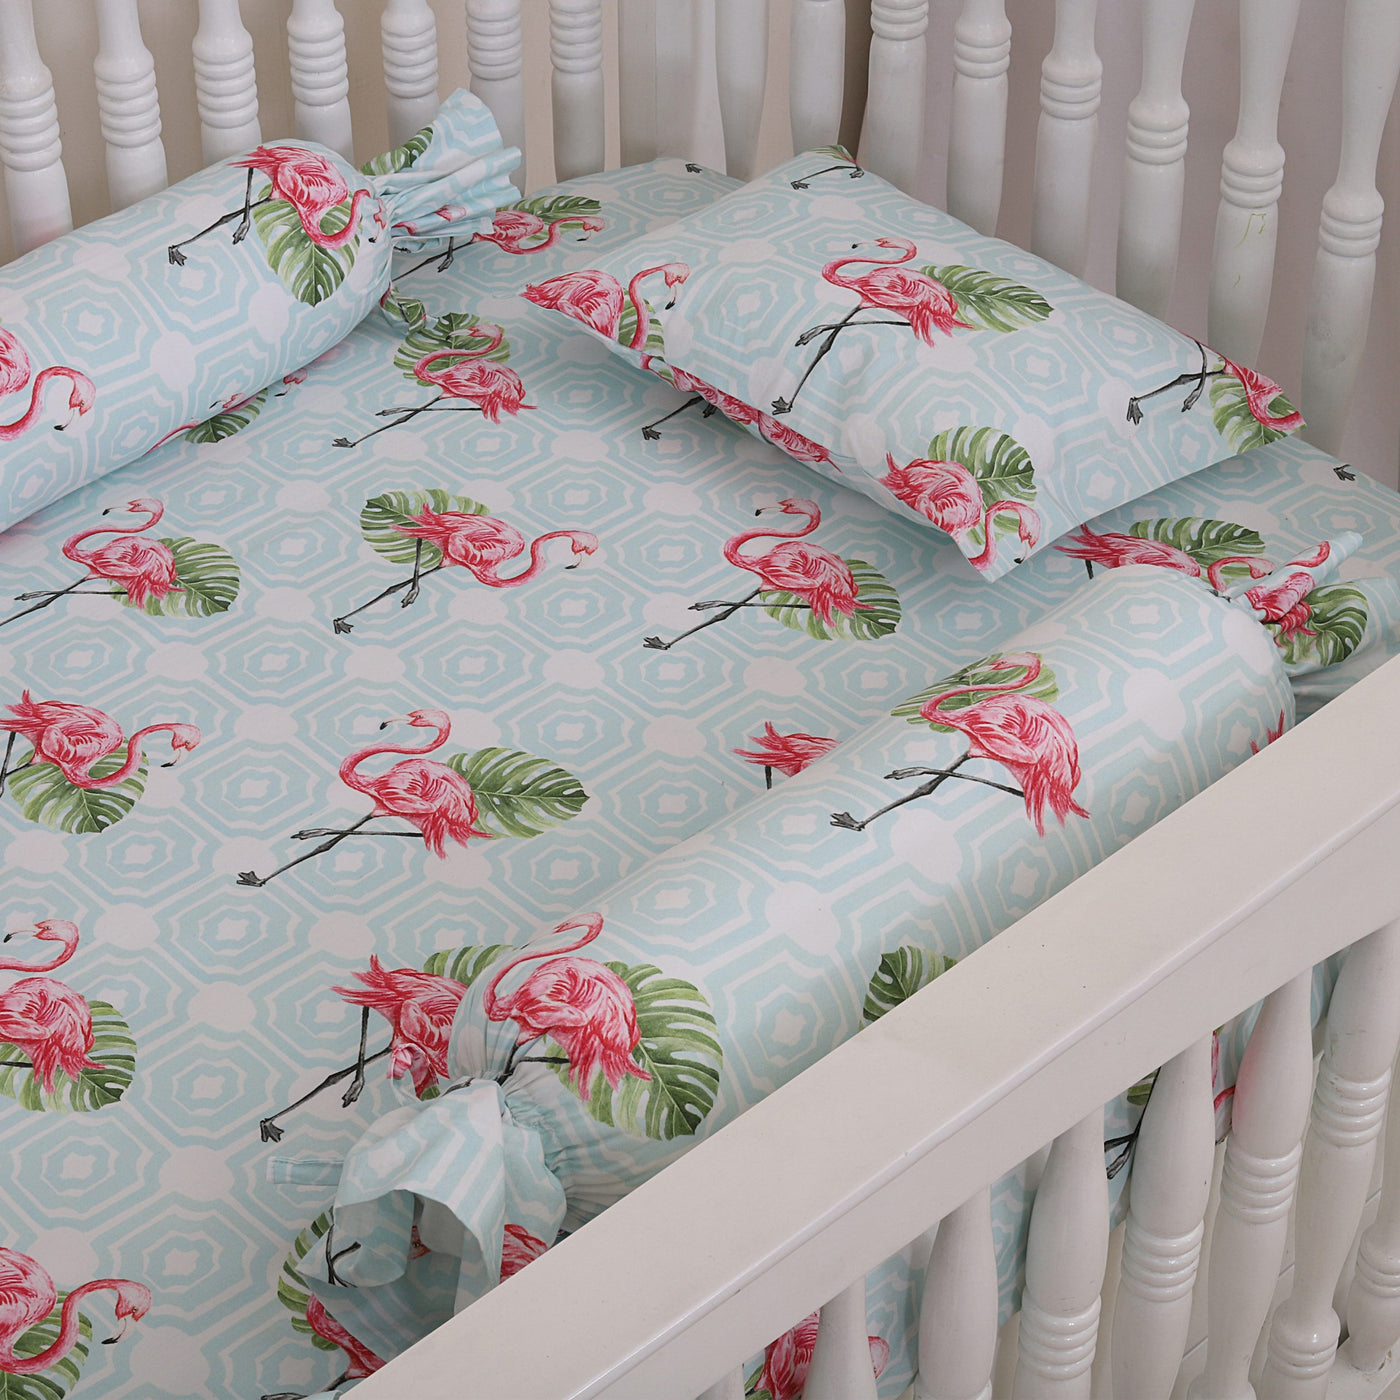 Dancing with the Flamingos Organic Cotton Fitted Sheet